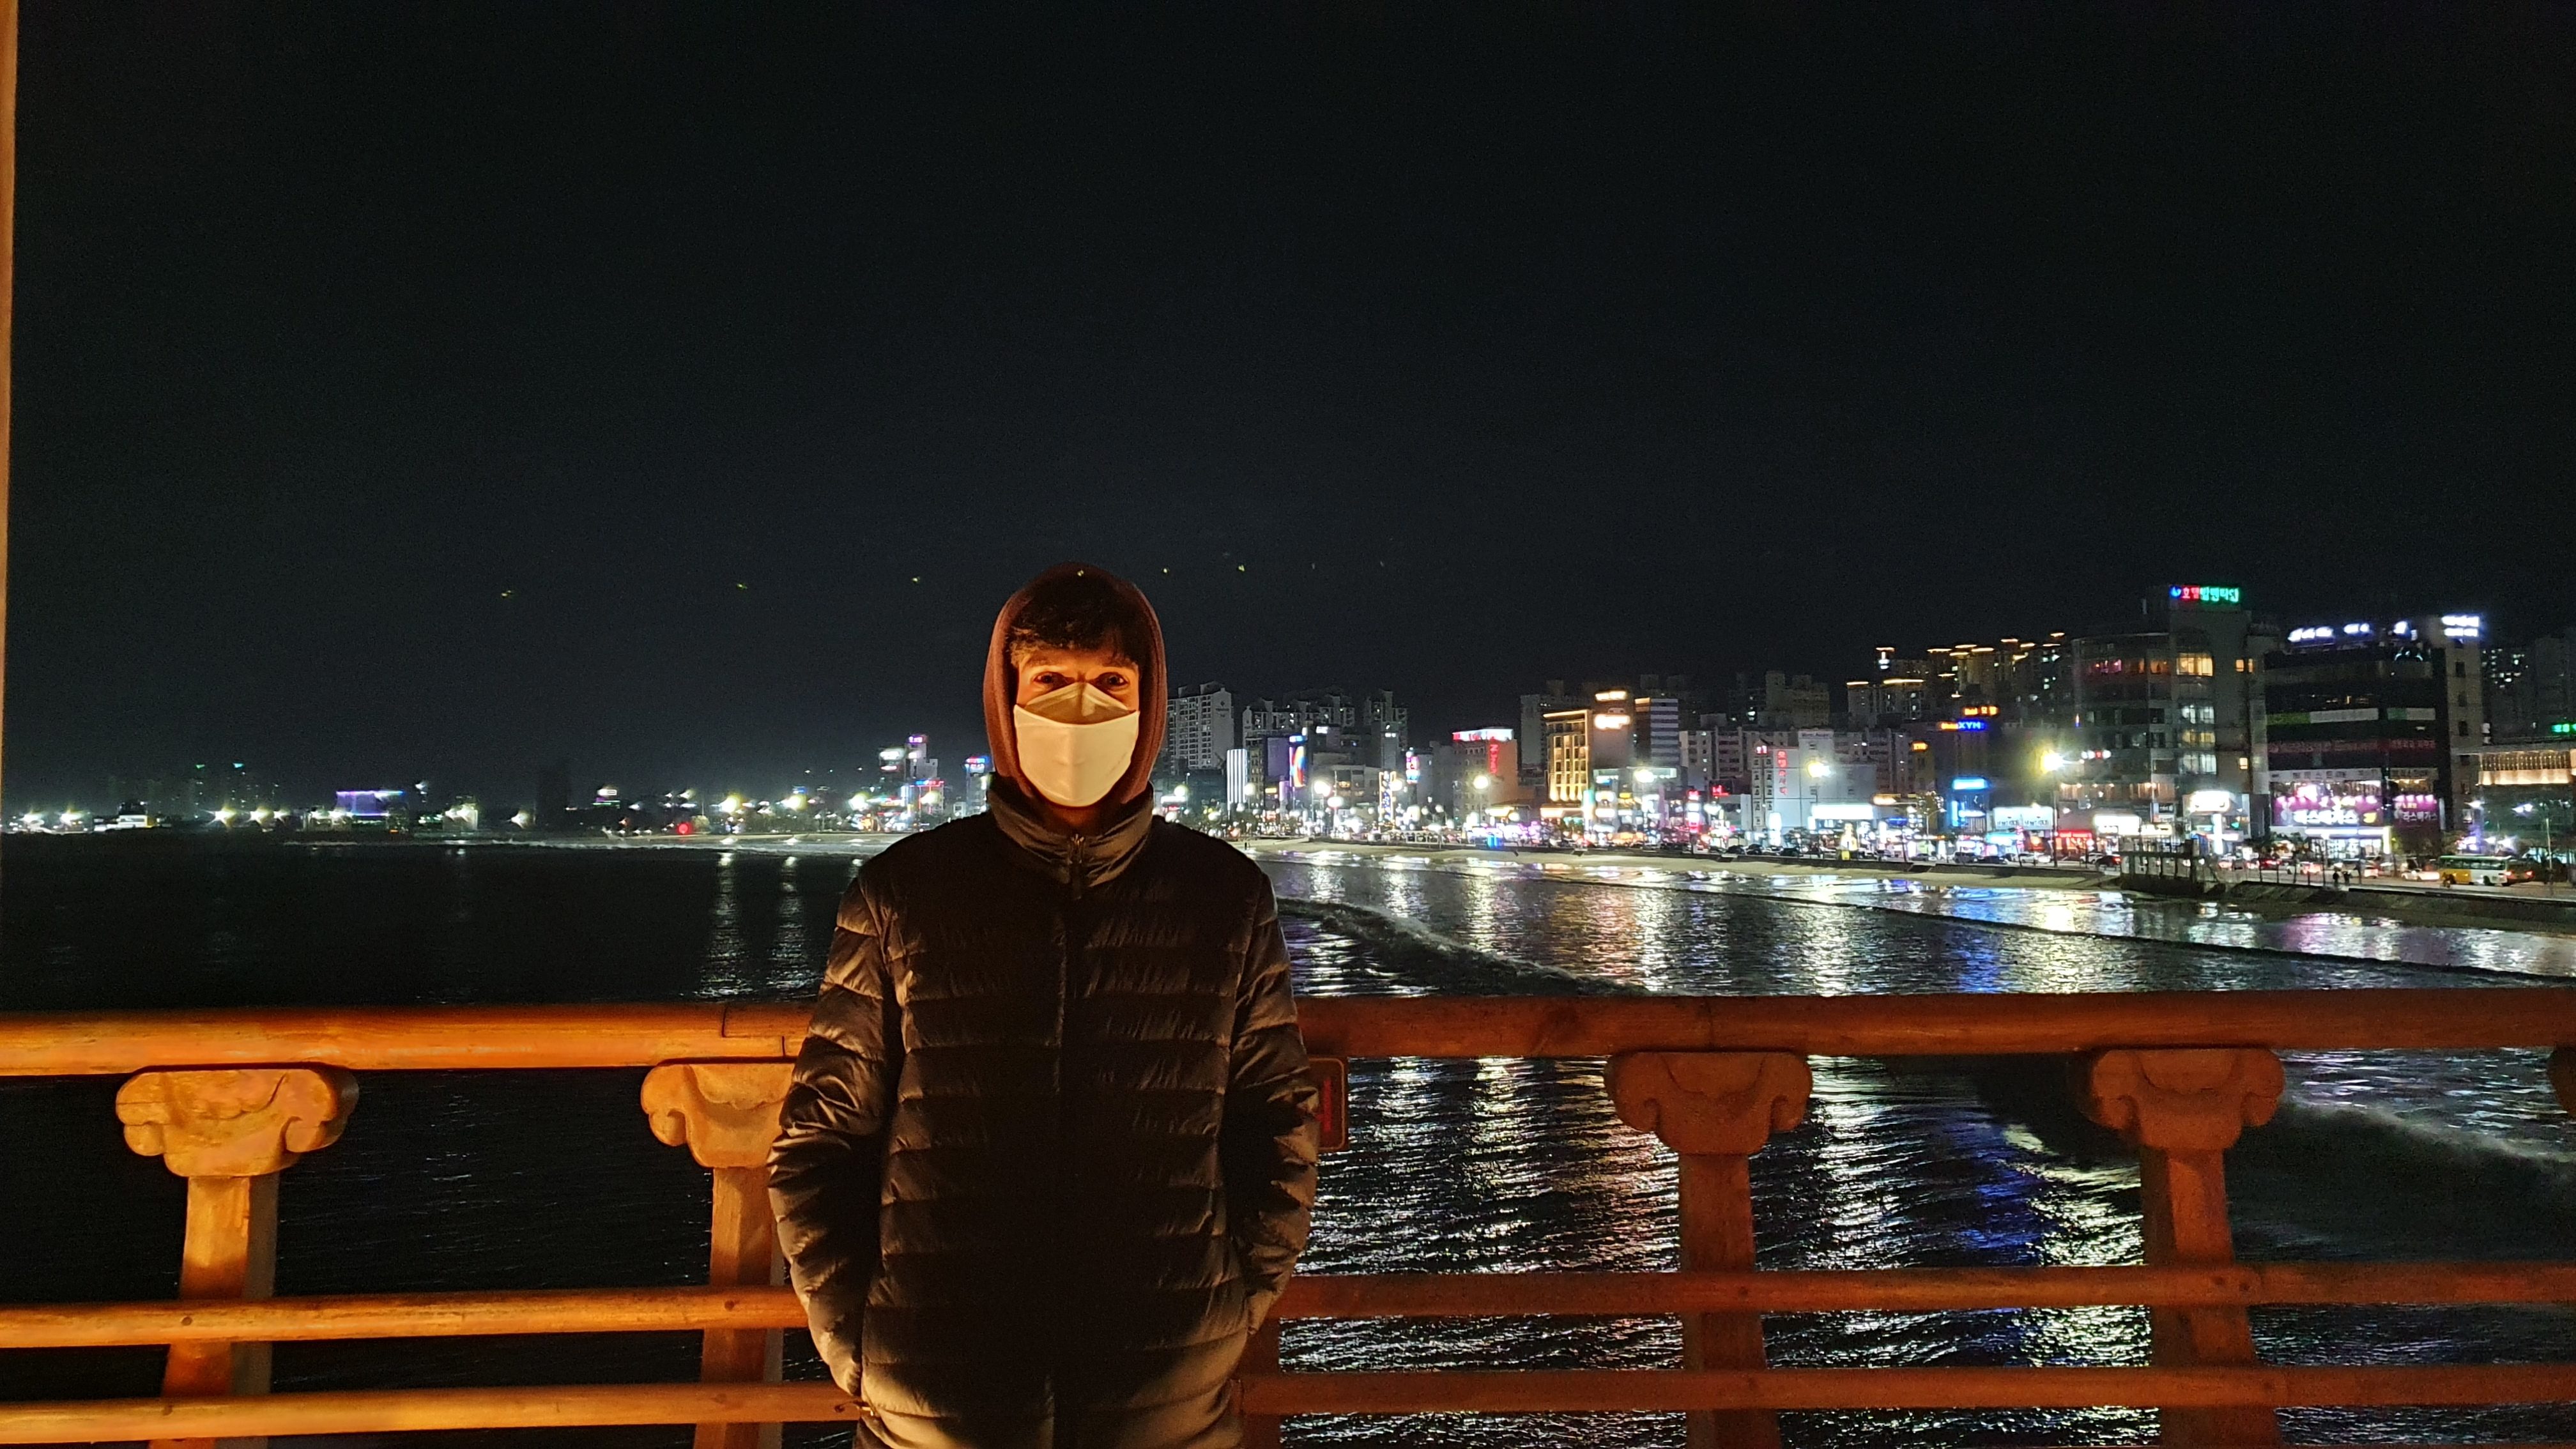 Night view of beach city with man in foreground